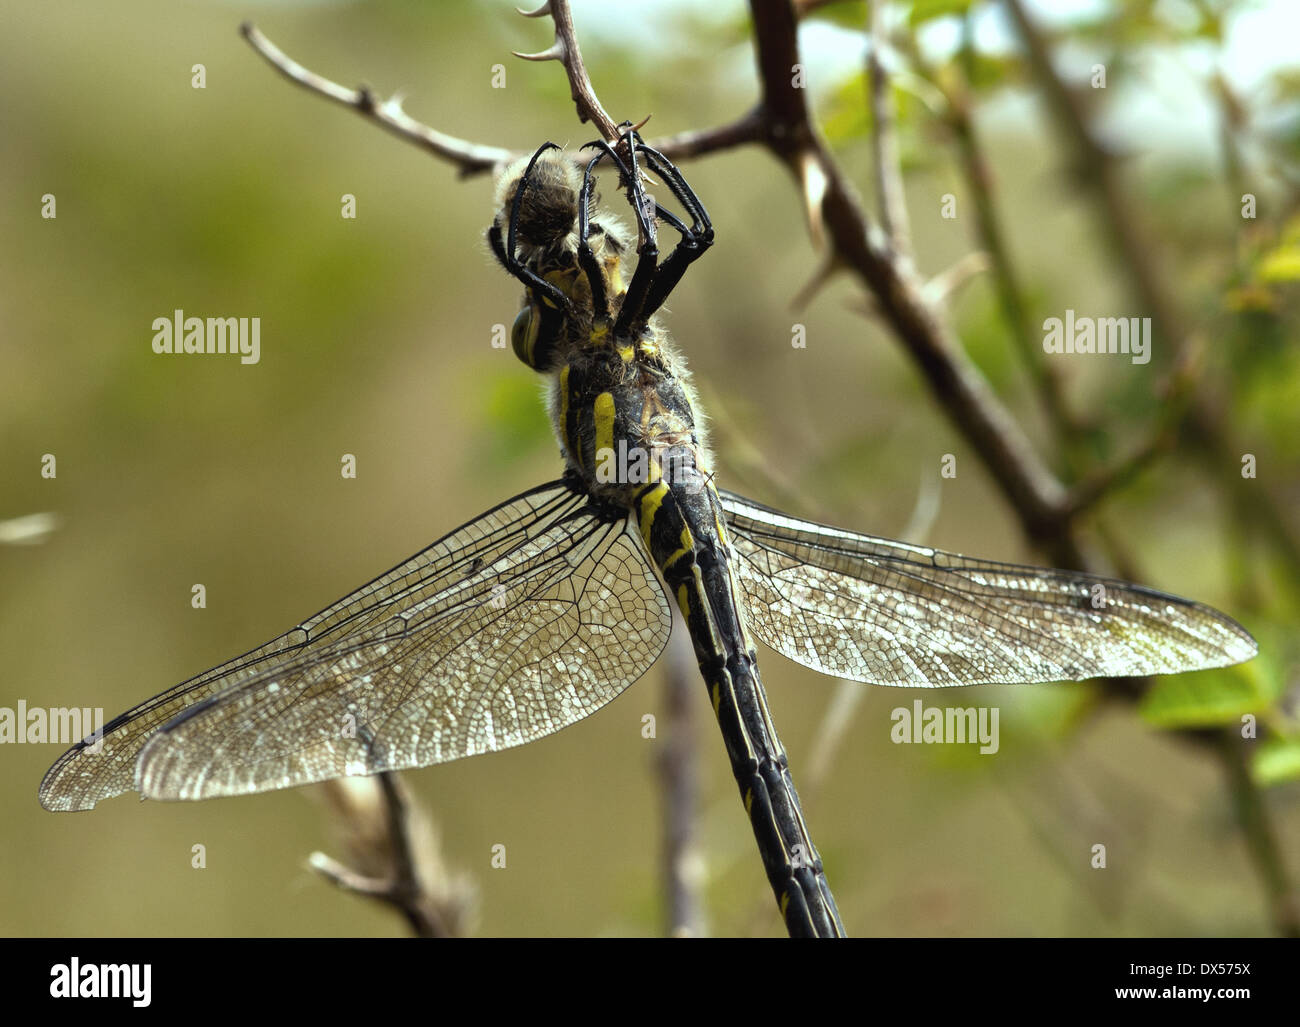 Dragonfly eating spider Foto Stock